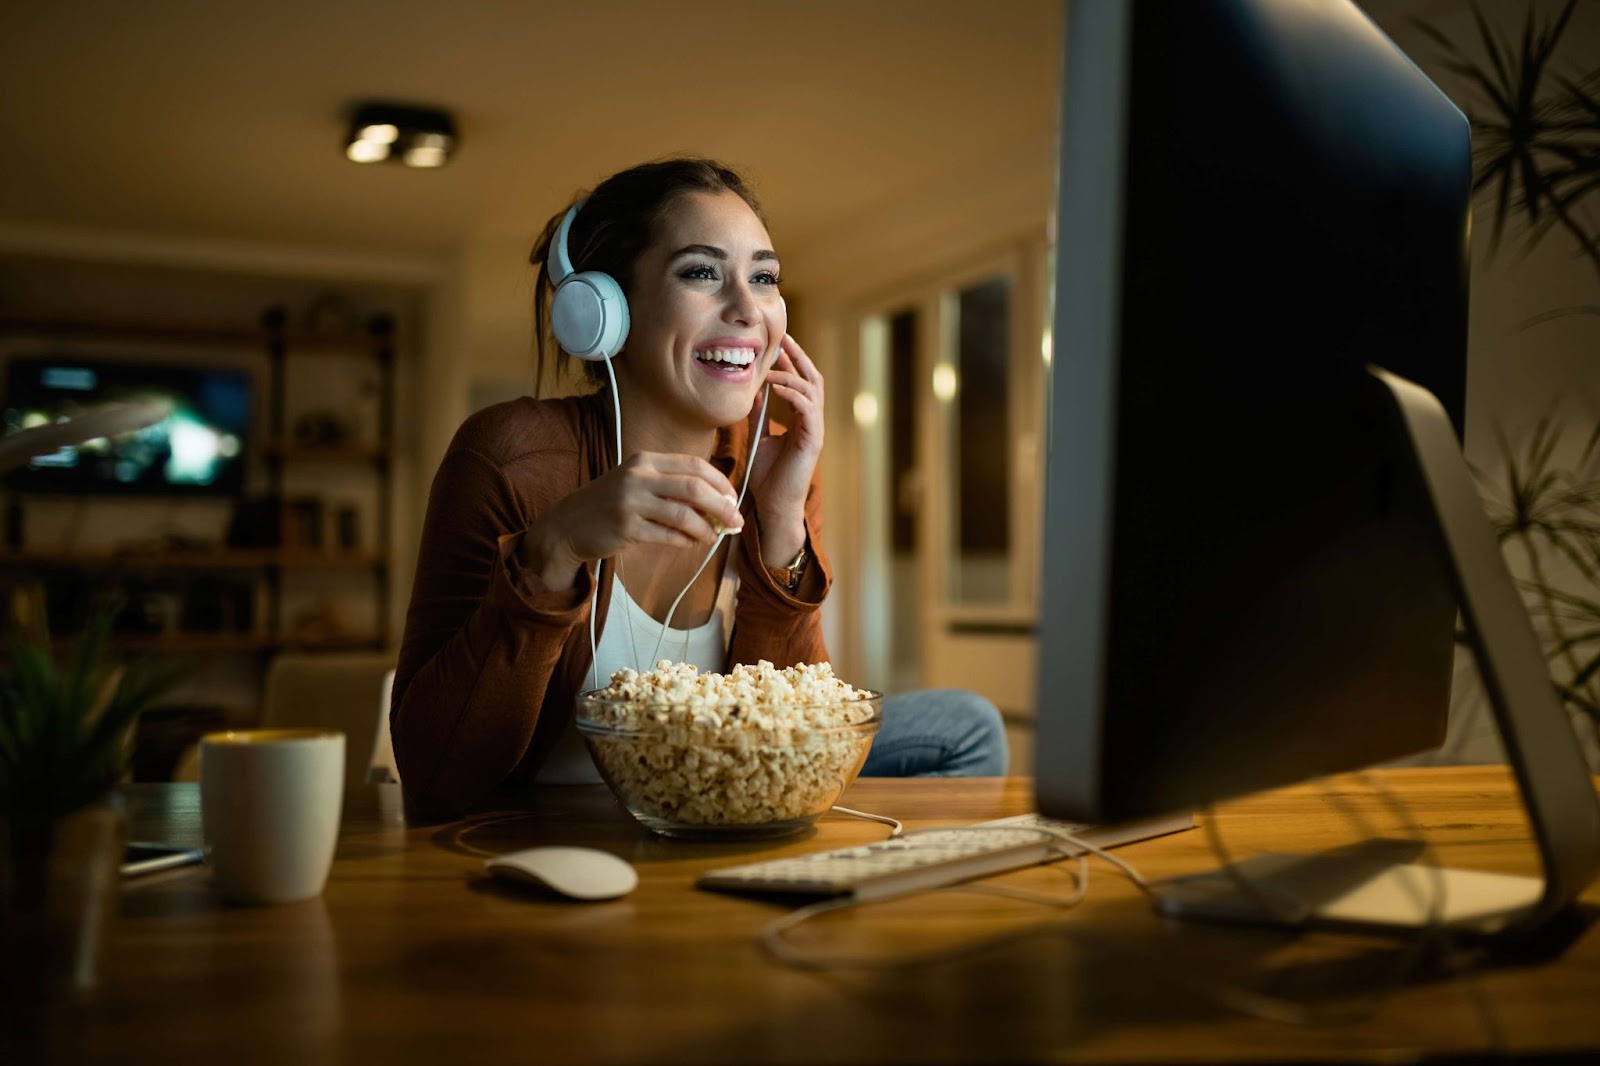 Happy woman eating popcorn and watching movie on computer